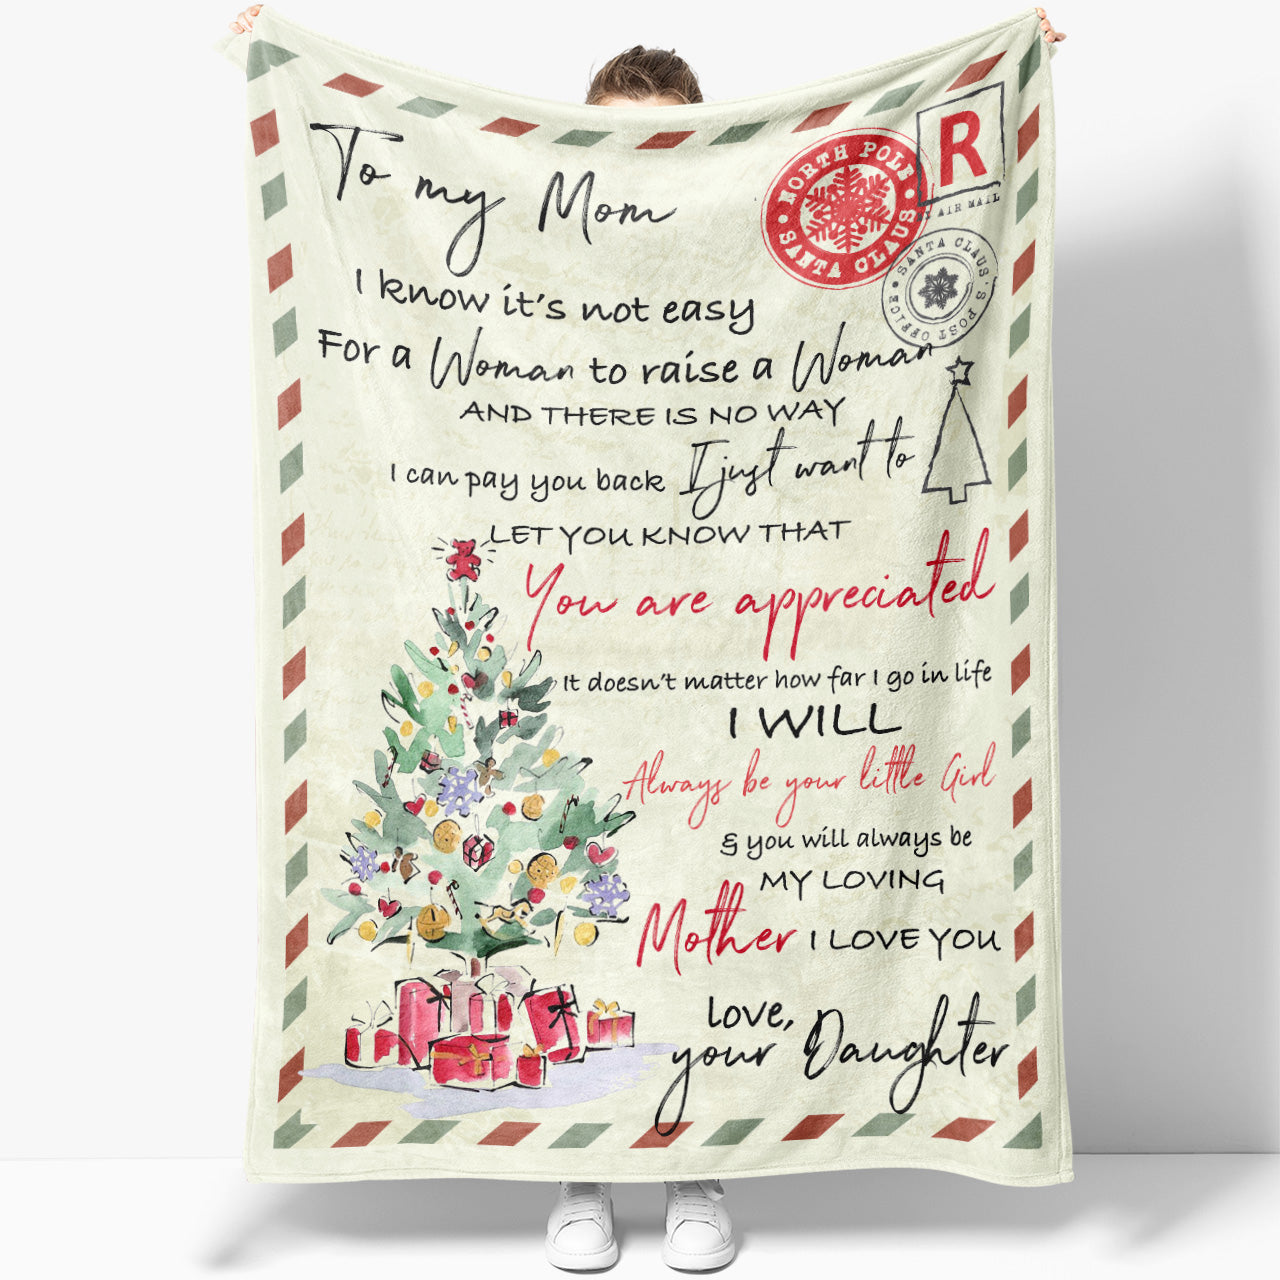 Blanket Gift Ideas For Mom, Christmas Gifts For Mom, Its Not Easy, Mothers  Day Gift Ideas, Mothers Day Gifts From Daughter, Top Mothers Day Gift Idea  - Sweet Family Gift